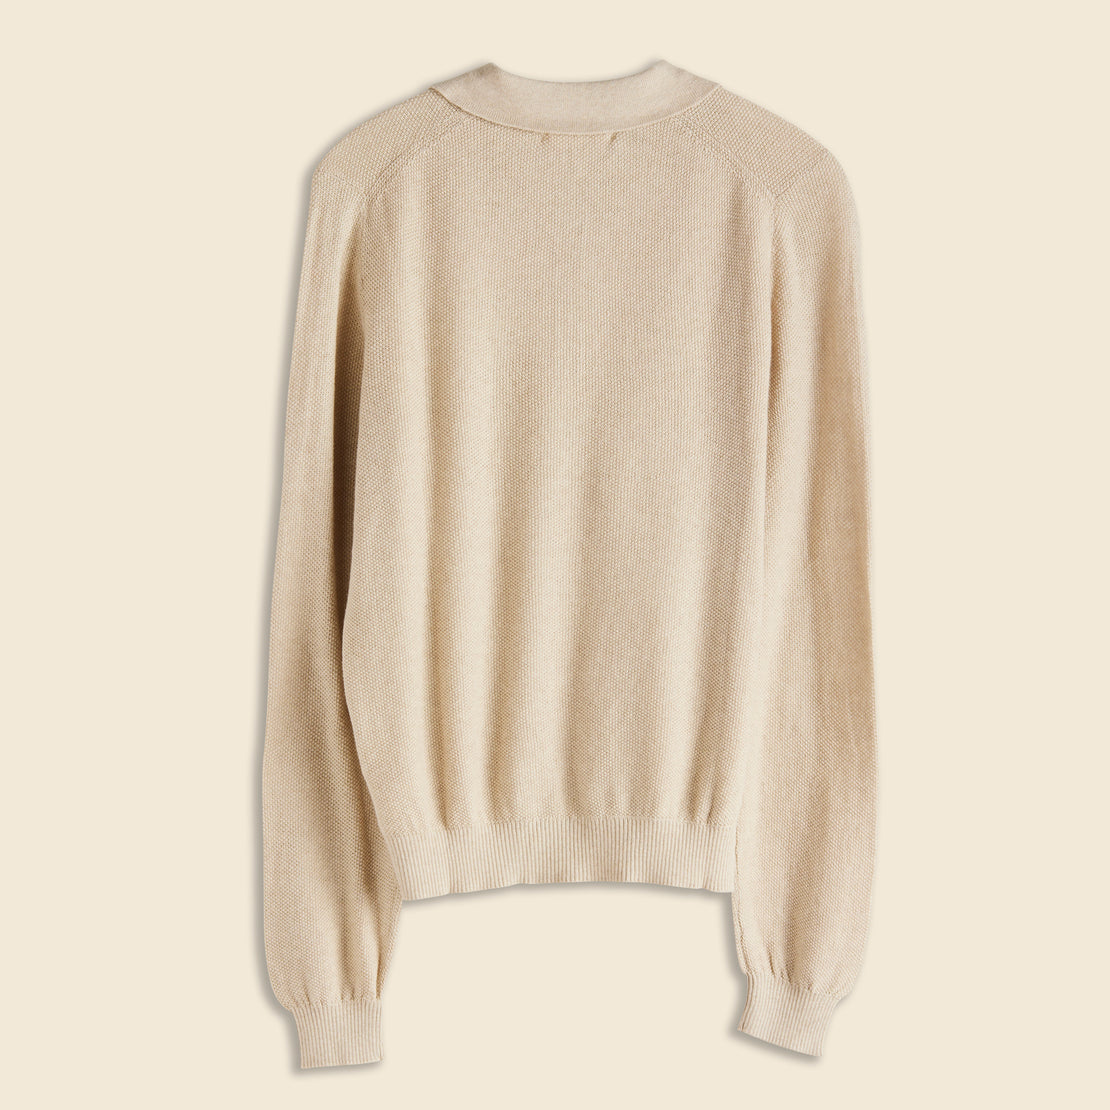 Alice Polo Sweater - Driftwood - Alex Mill - STAG Provisions - W - Tops - Sweater